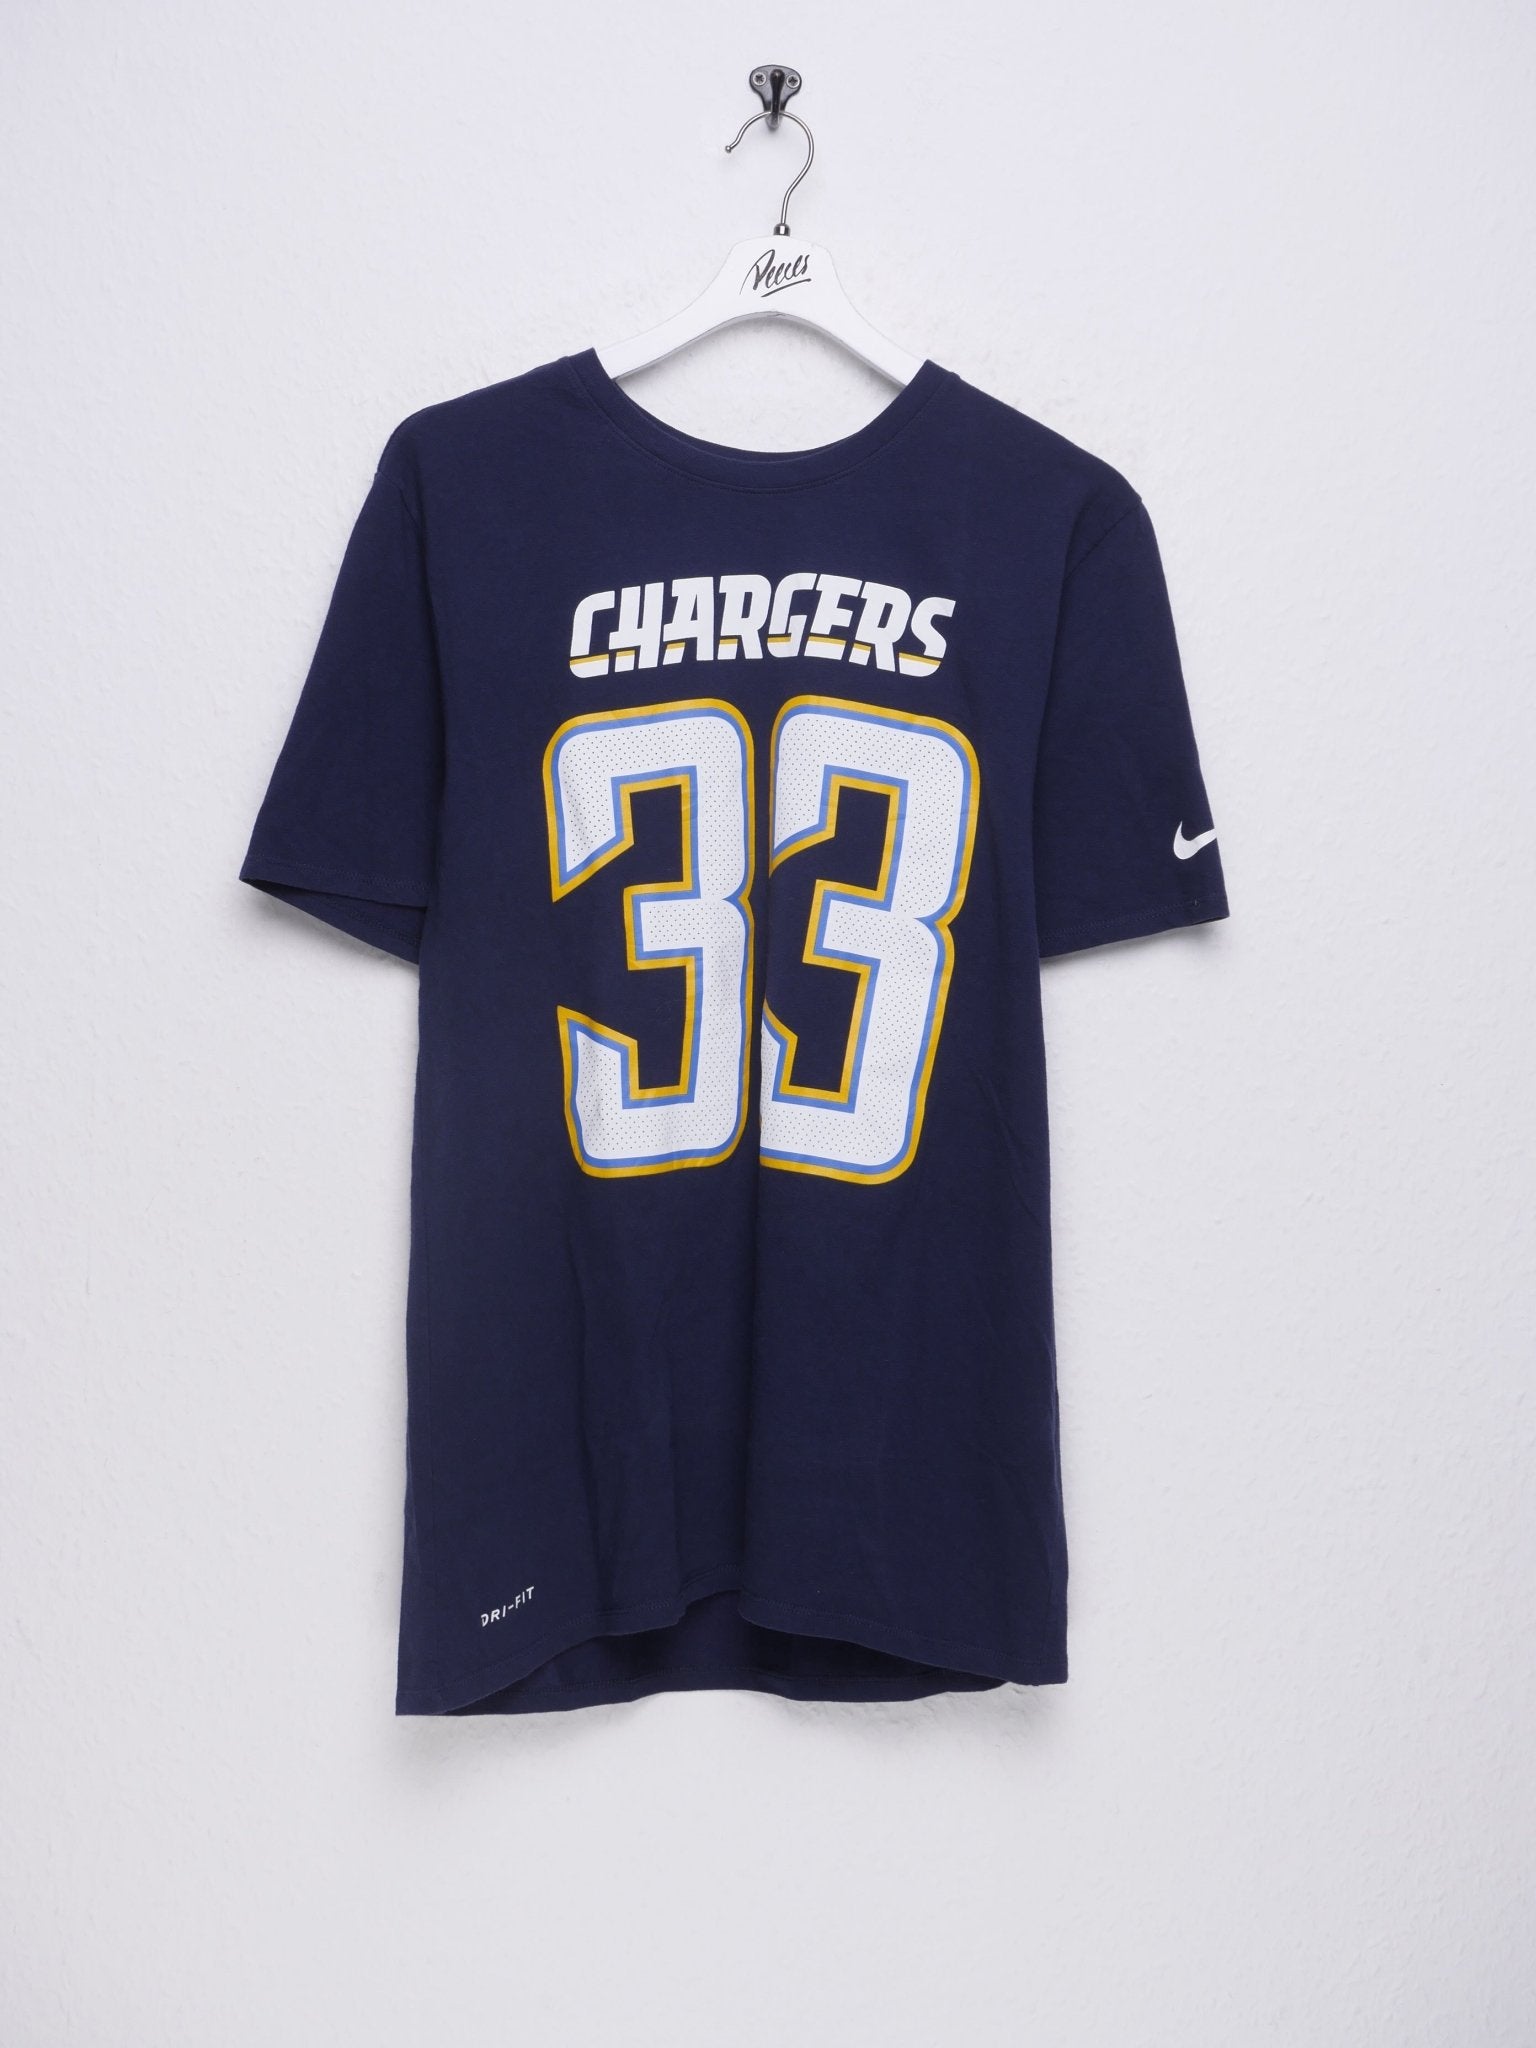 Nike printed Chargers Graphic Vintage Shirt - Peeces